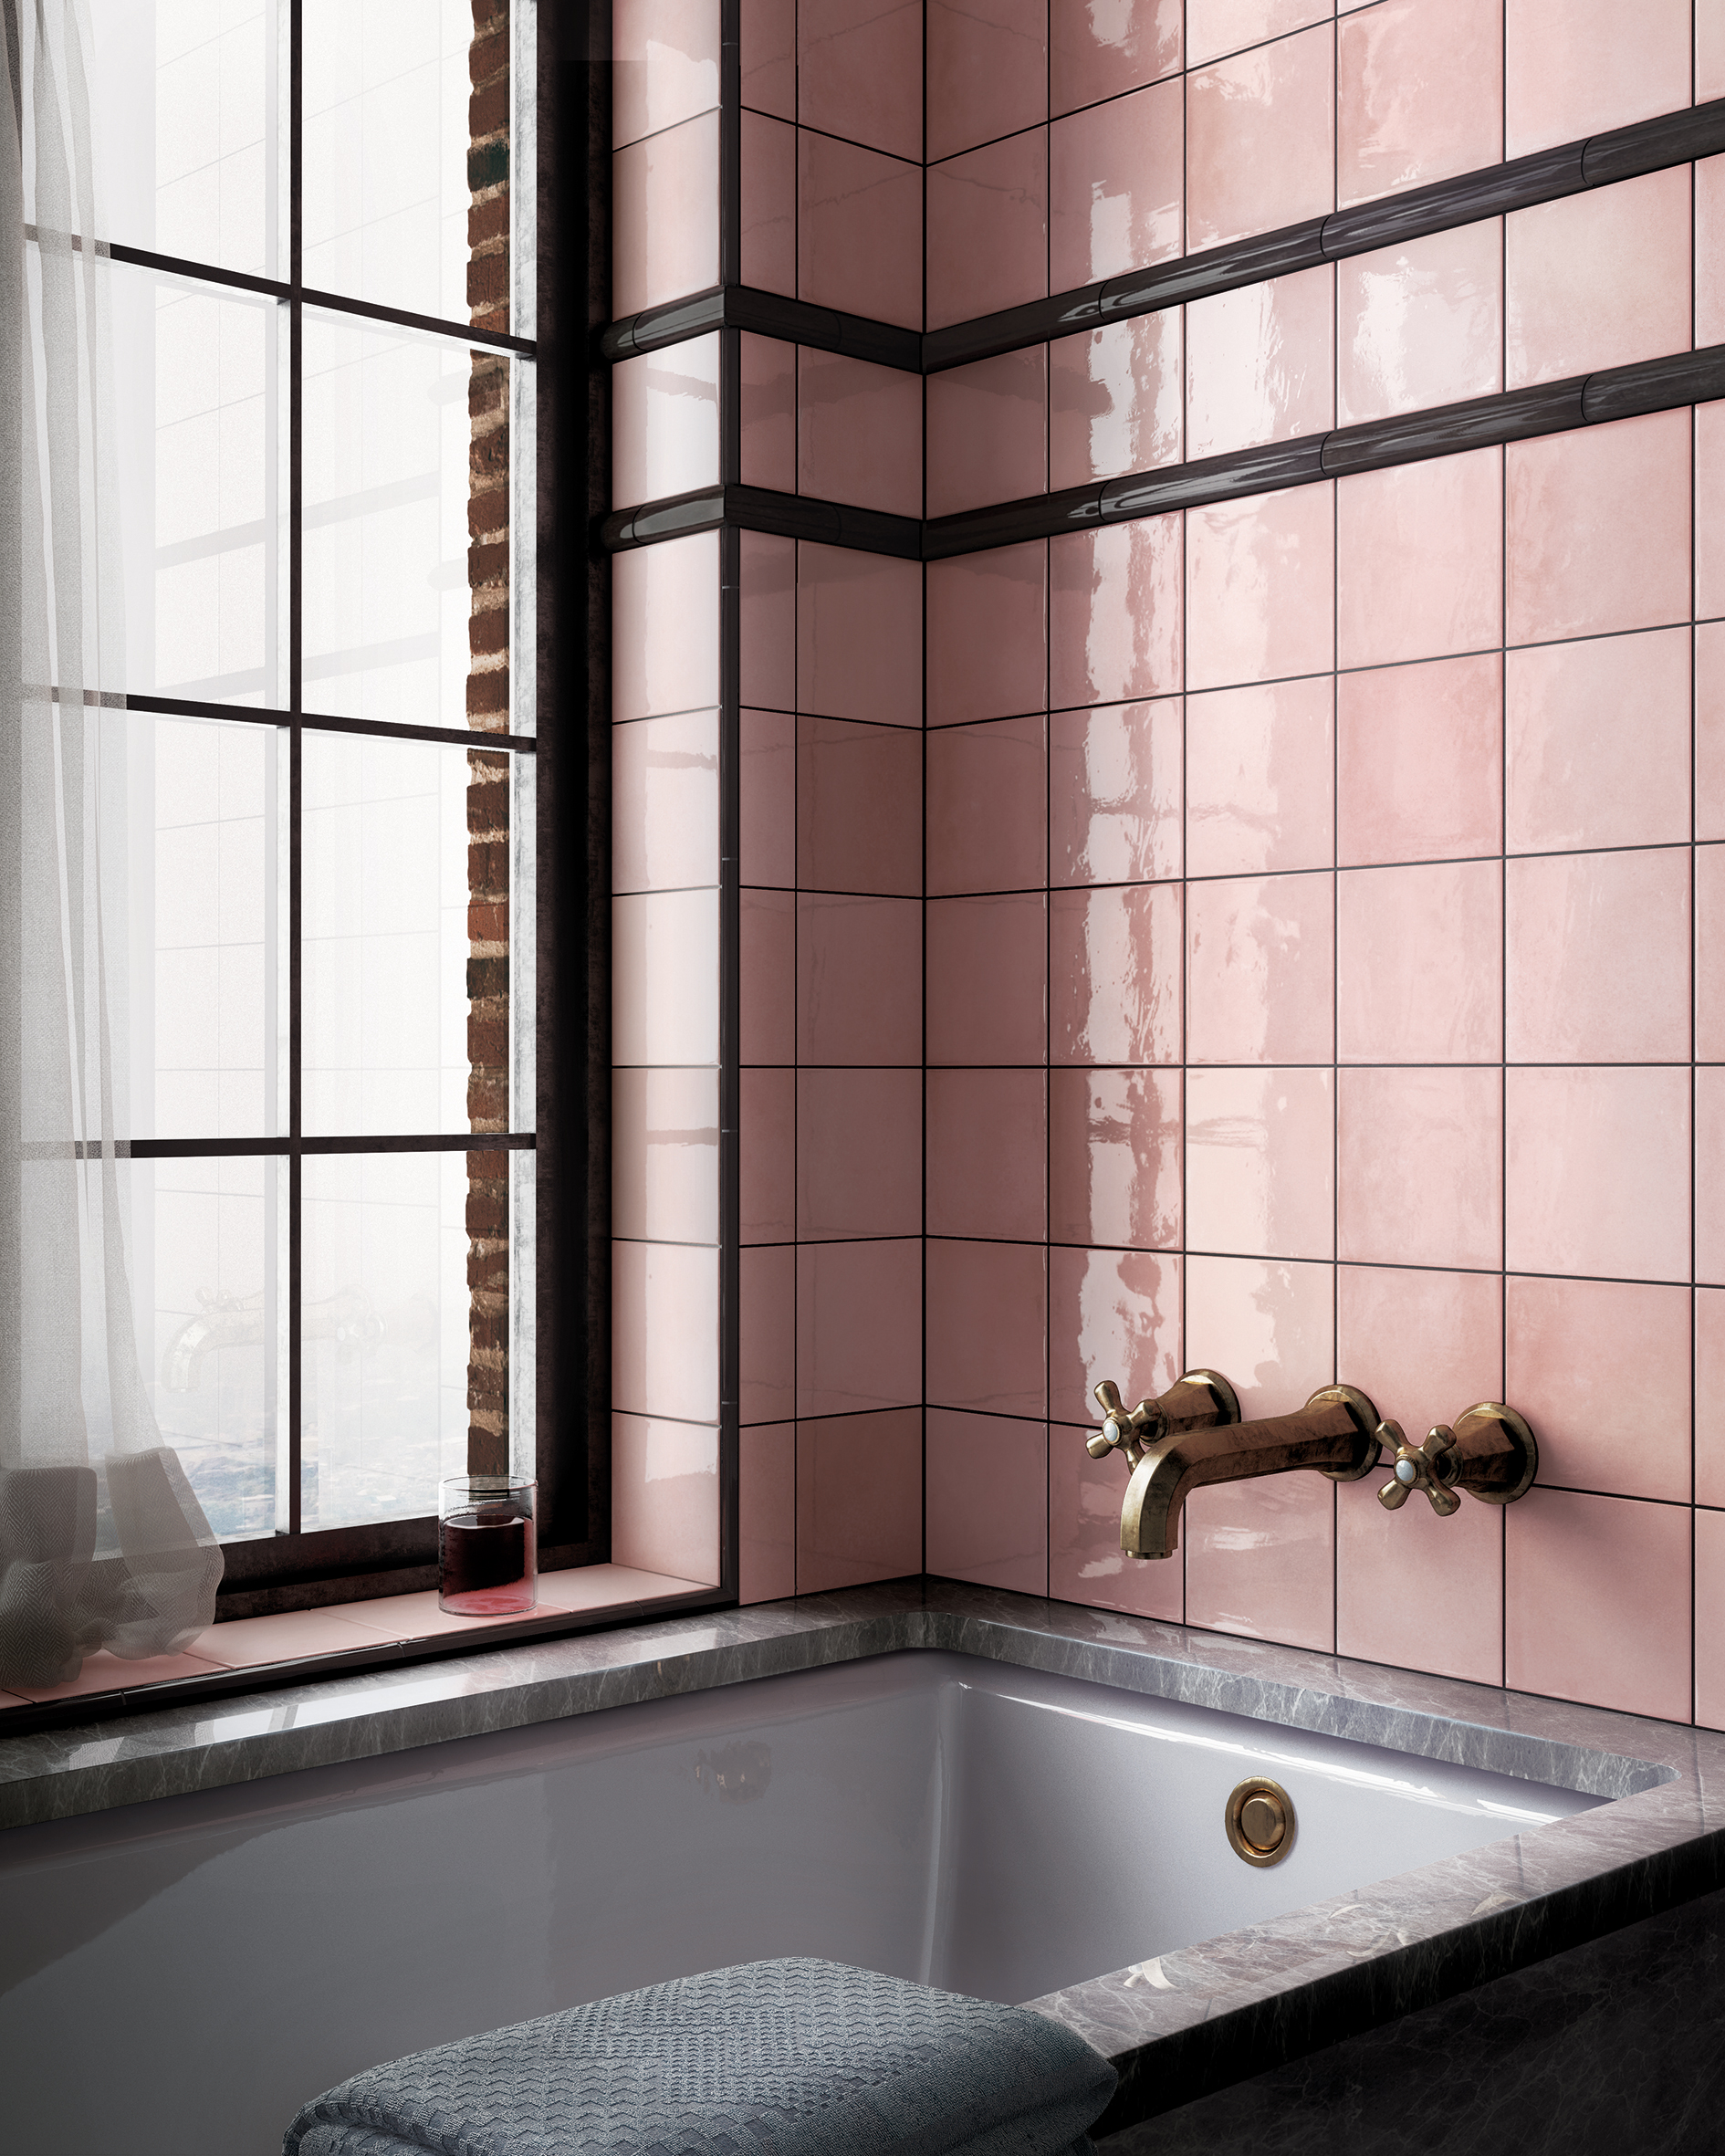 Bathroom with pink square tiles